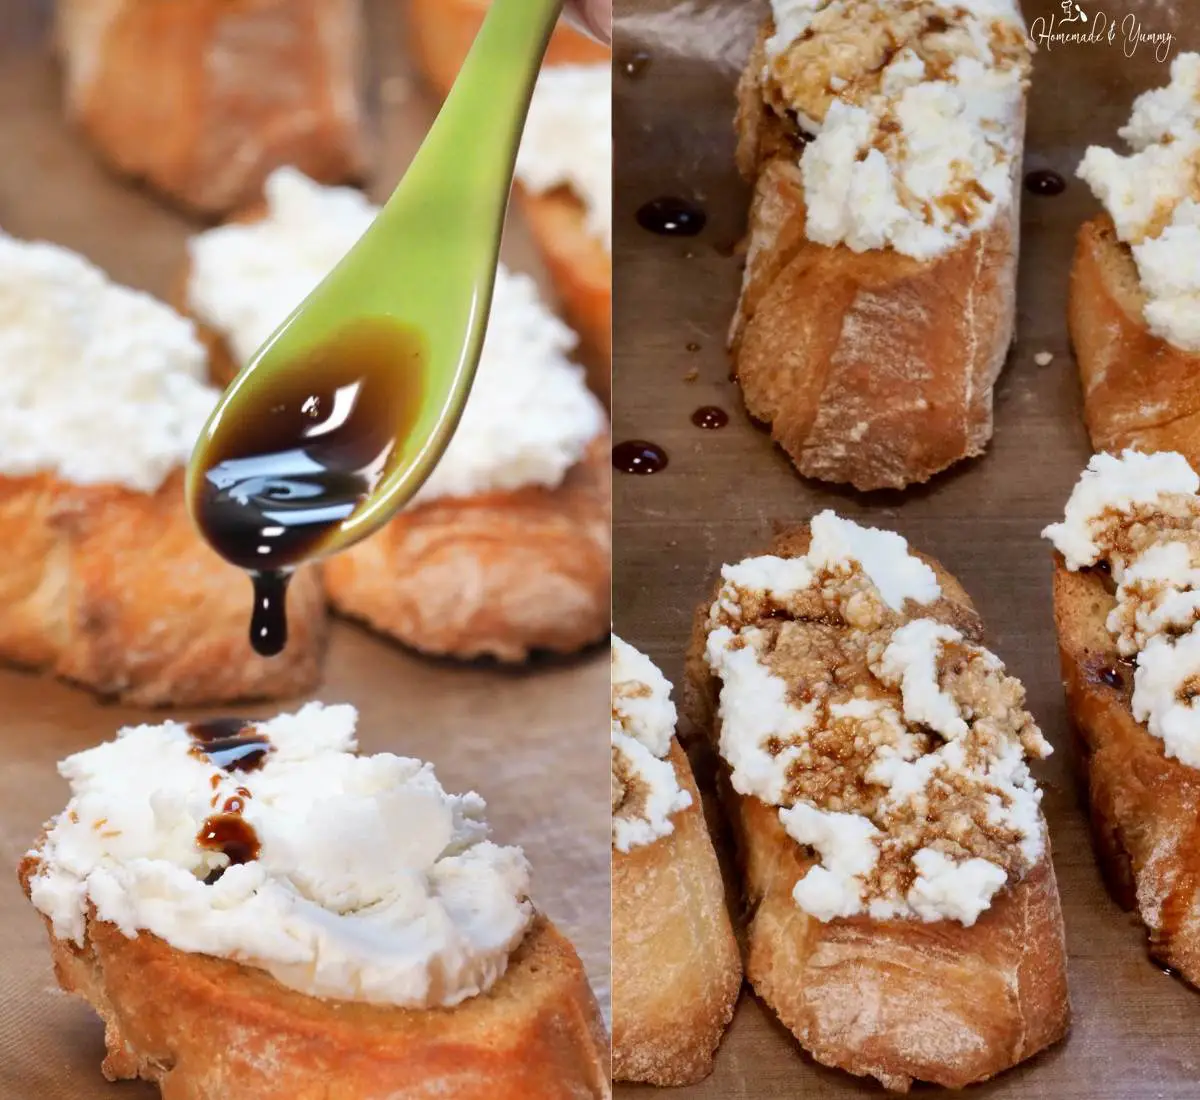 Topping bread appetizers with balsamic vinegar.